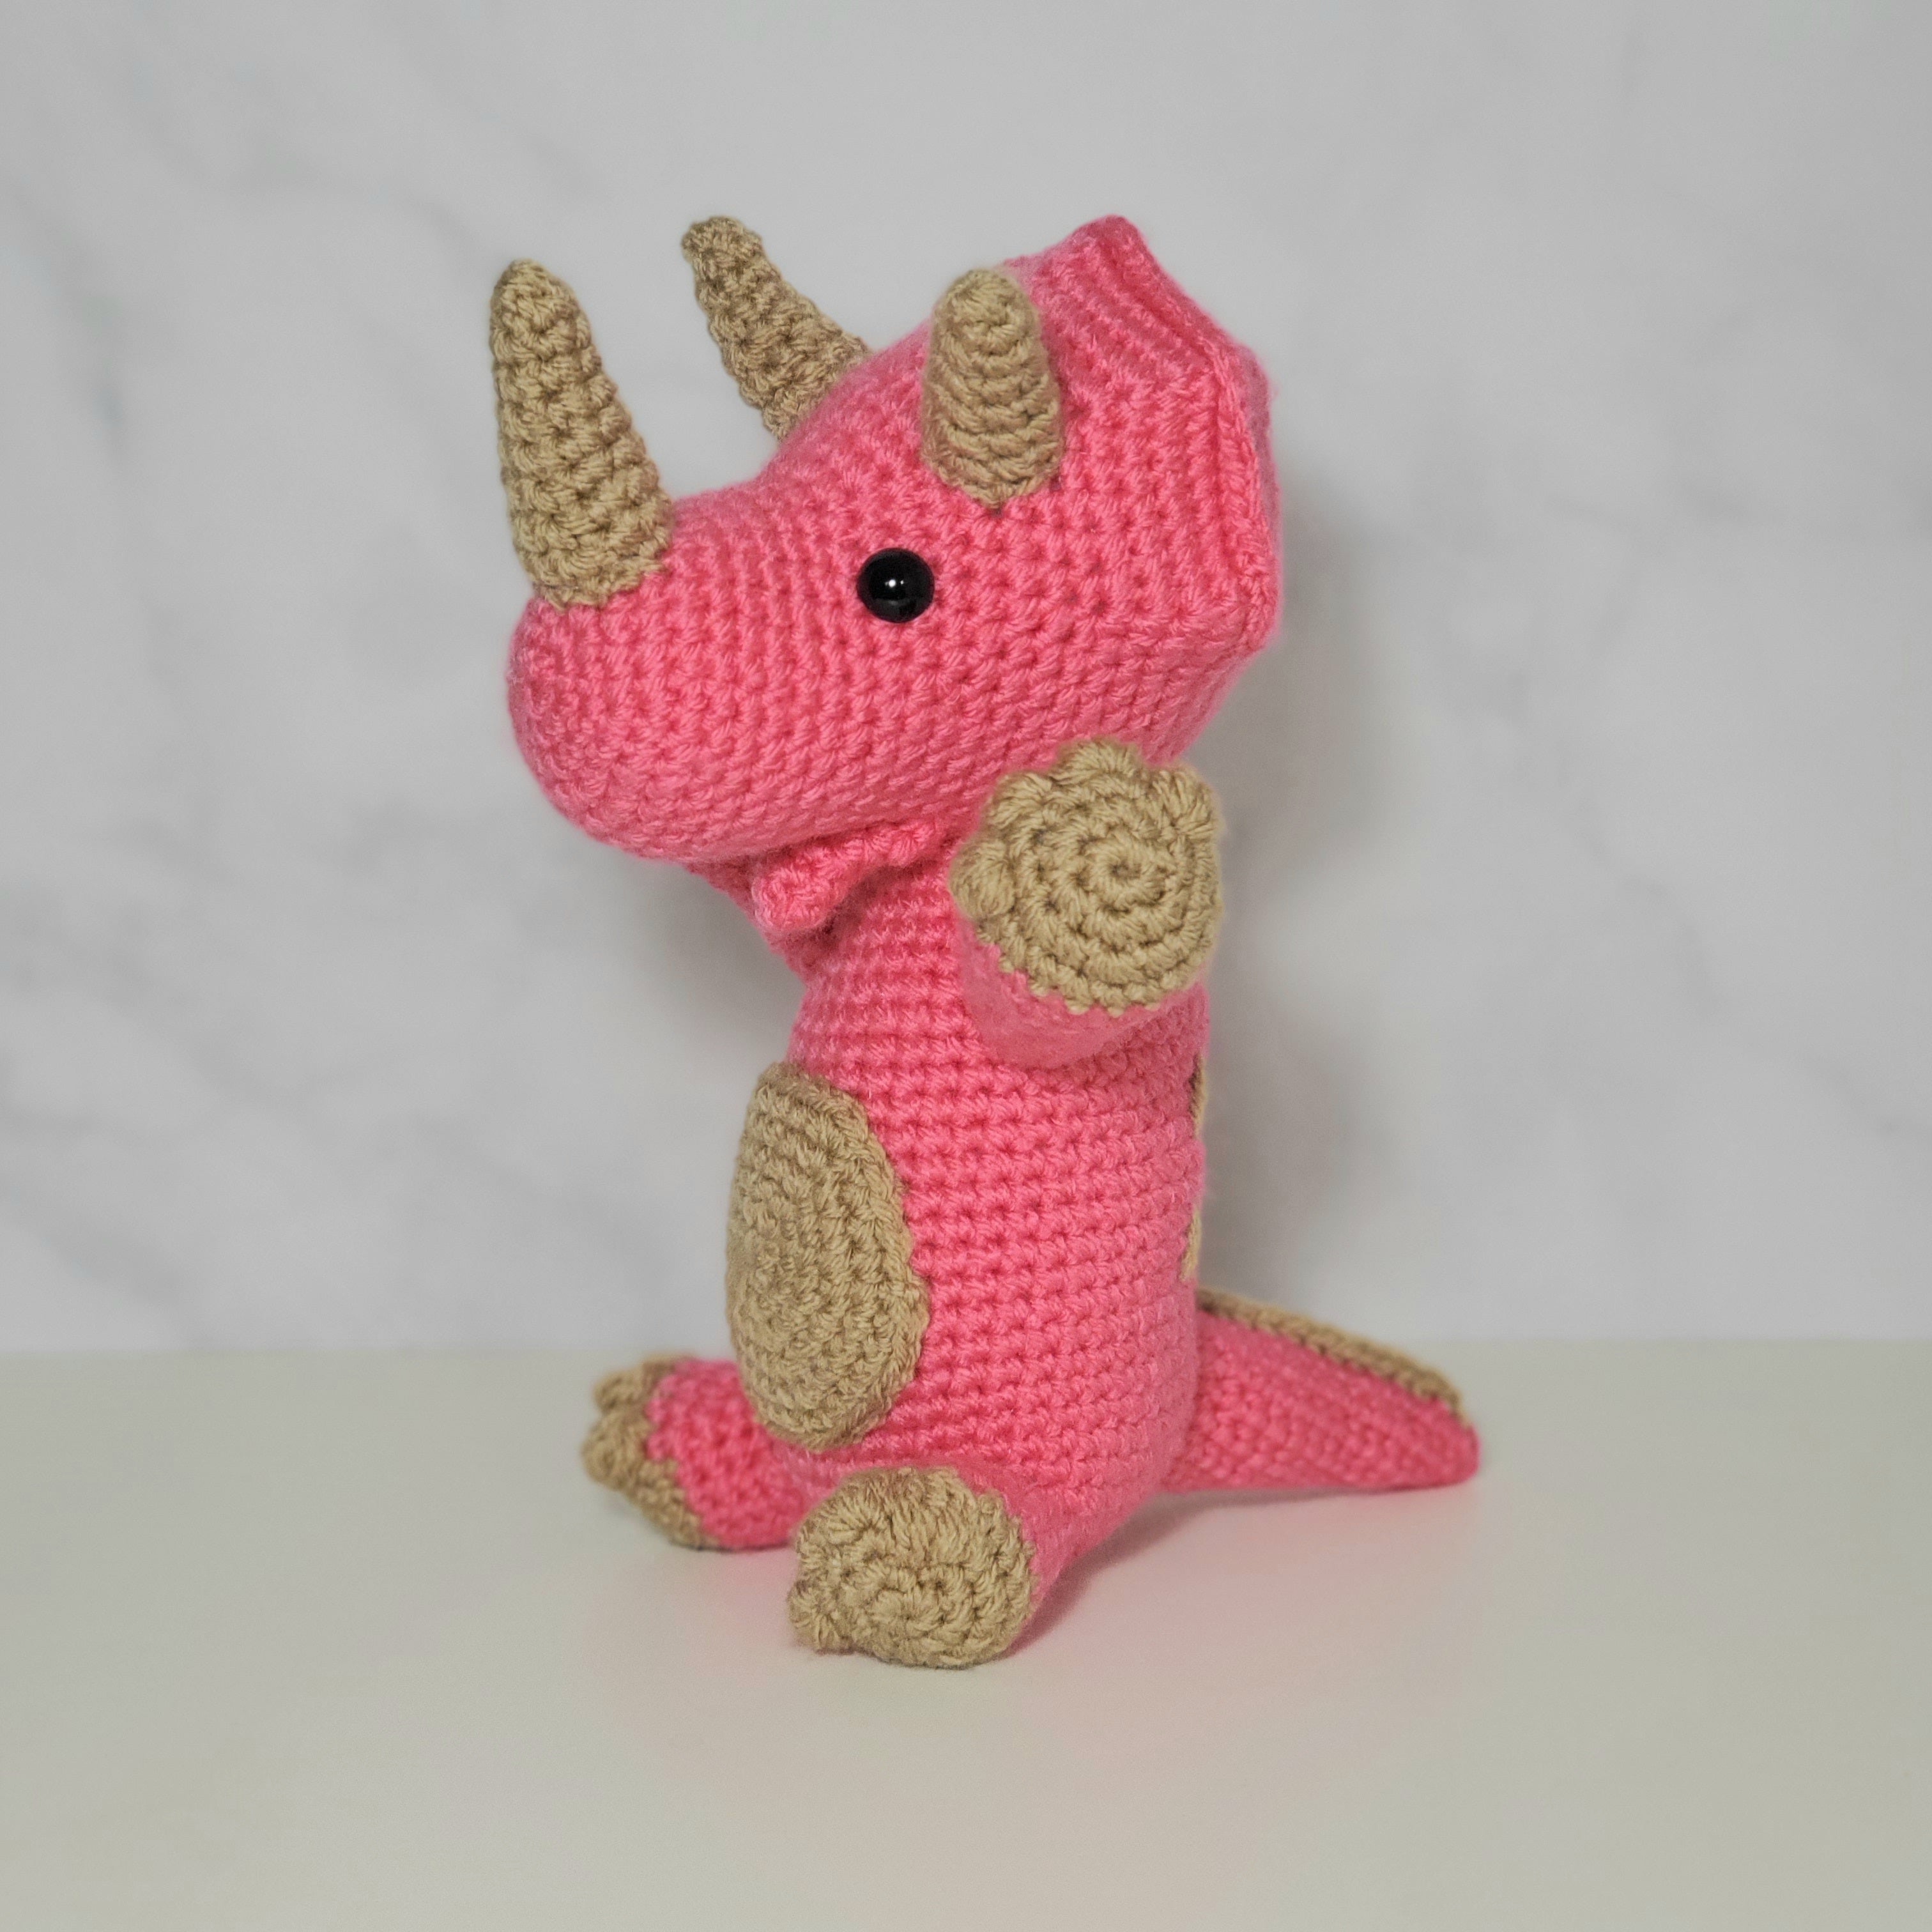 Crochet Toy - Pink Triceratops